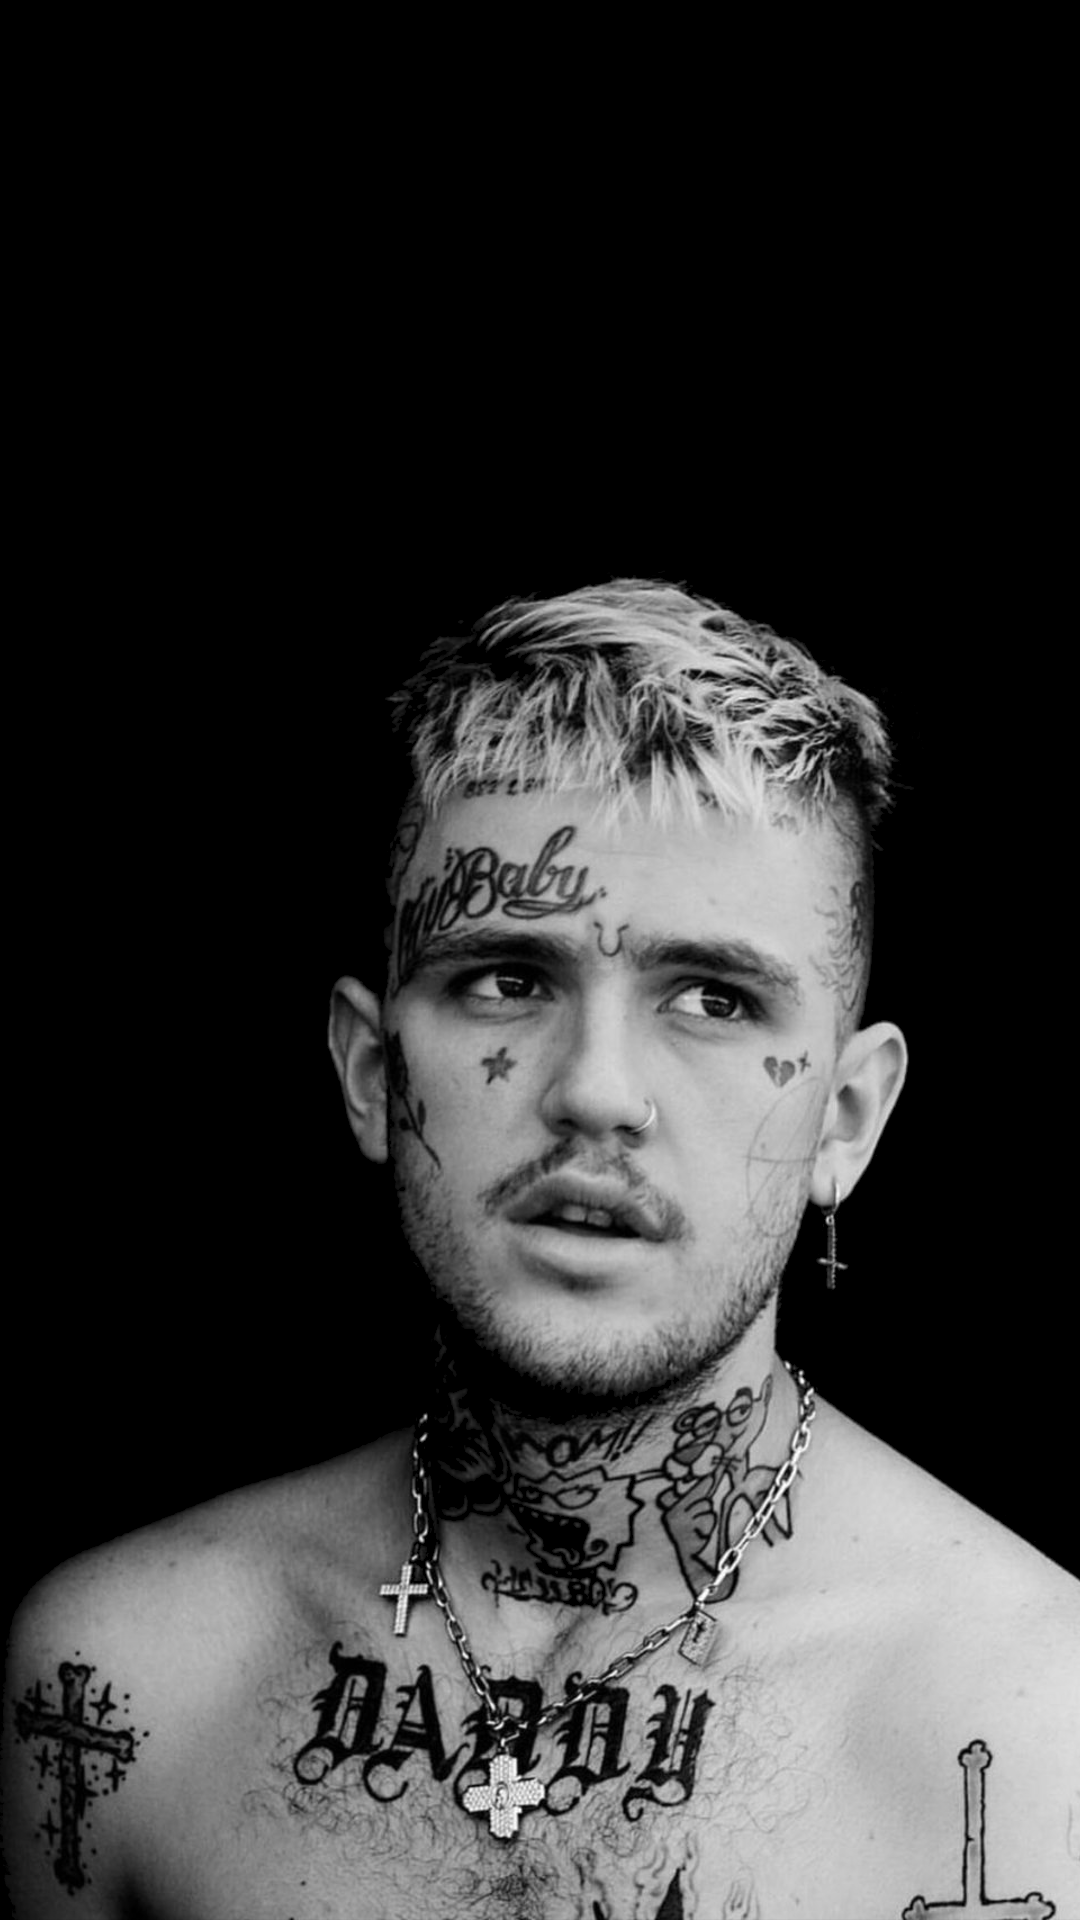 Lil Peep Wallpapers Lil Peep Wallpapers Wallpaper Cave If you're